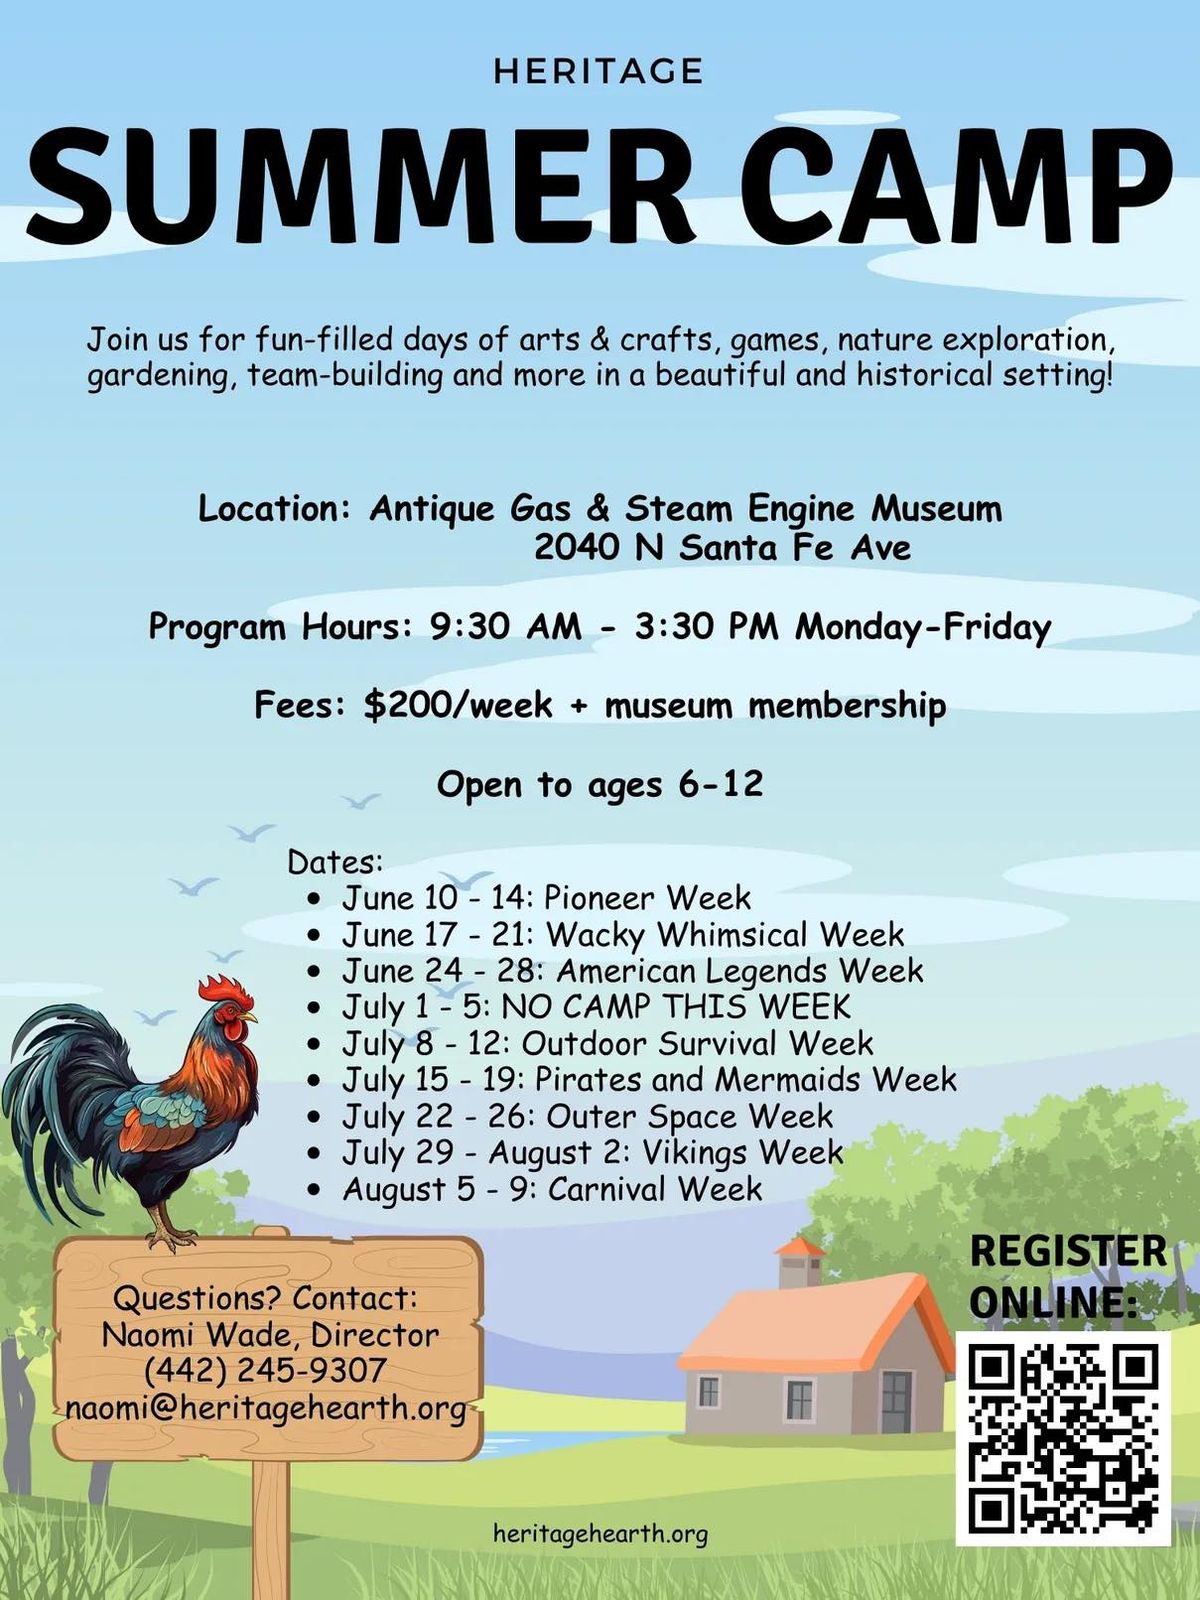 Heritage Summer Camp - Outer Space Week